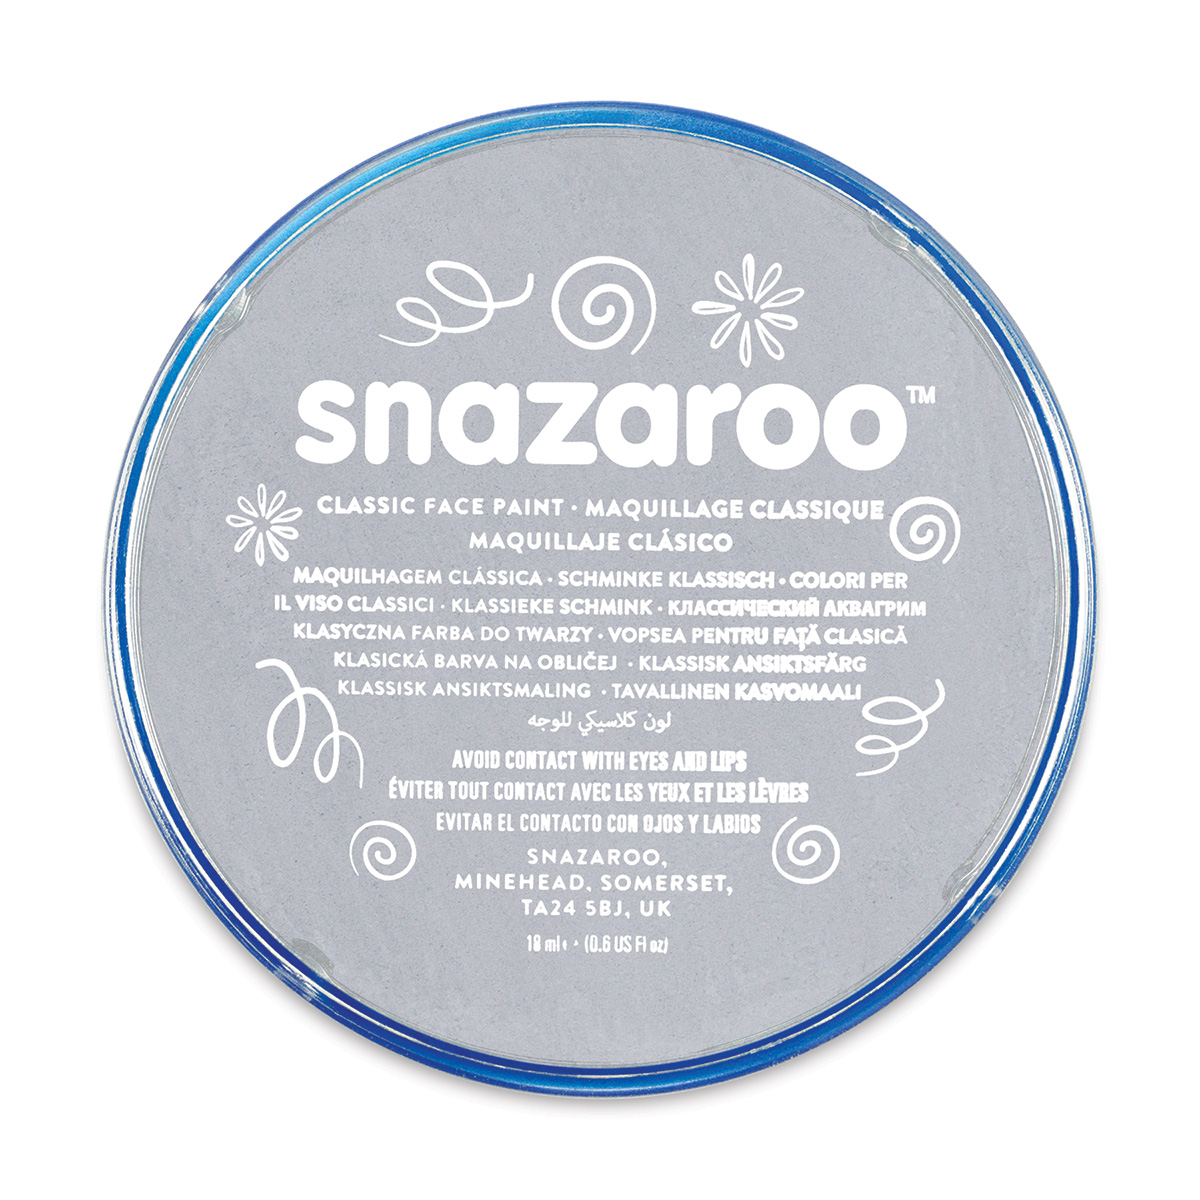 Snazaroo Classic Face Paint 18ml Bright Pink